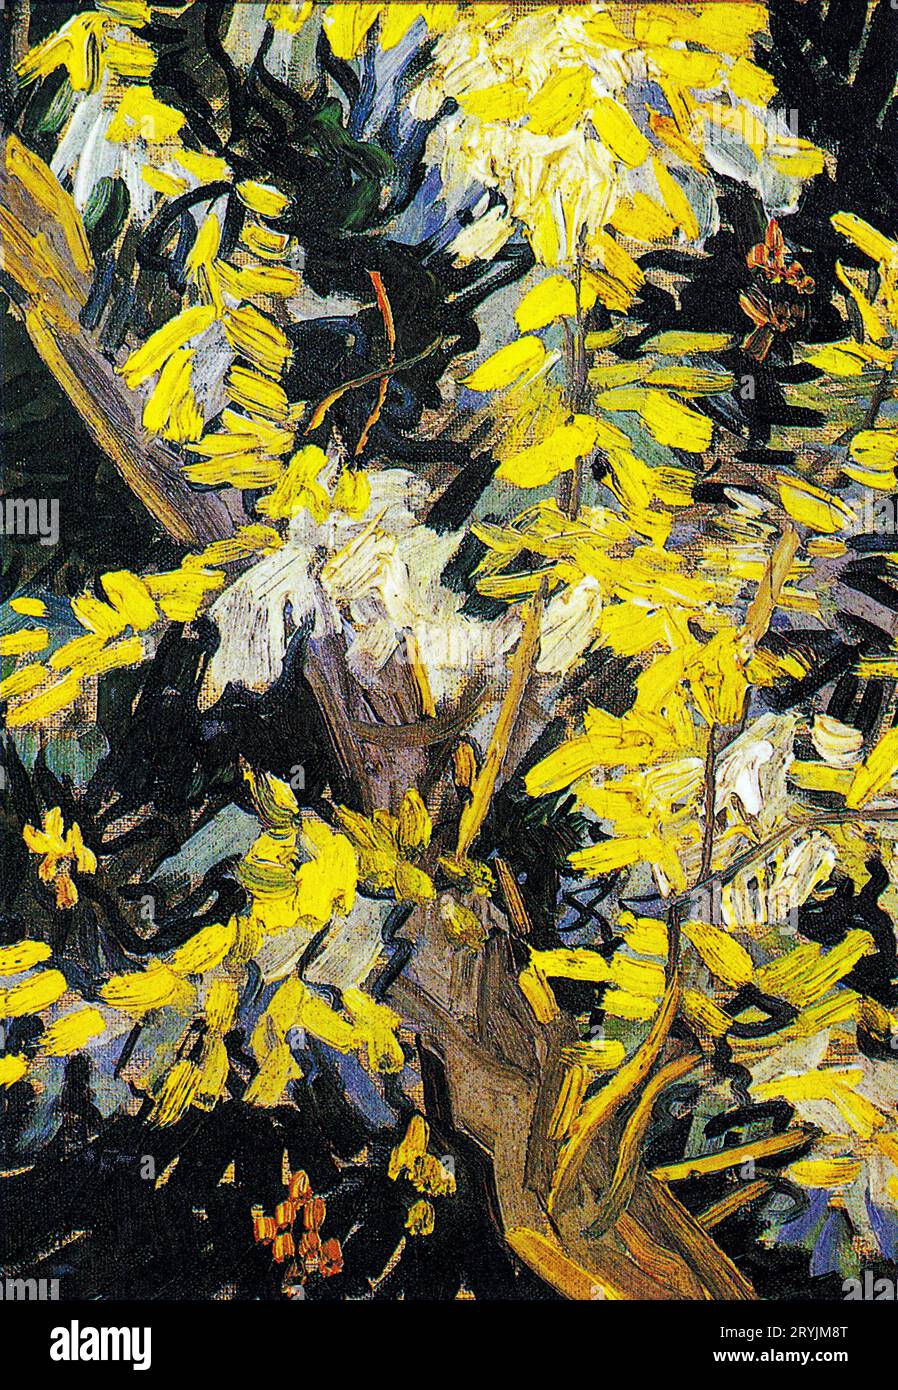 Vincent van Gogh's Blossoming Acacia Branches famous painting. Stock Photo